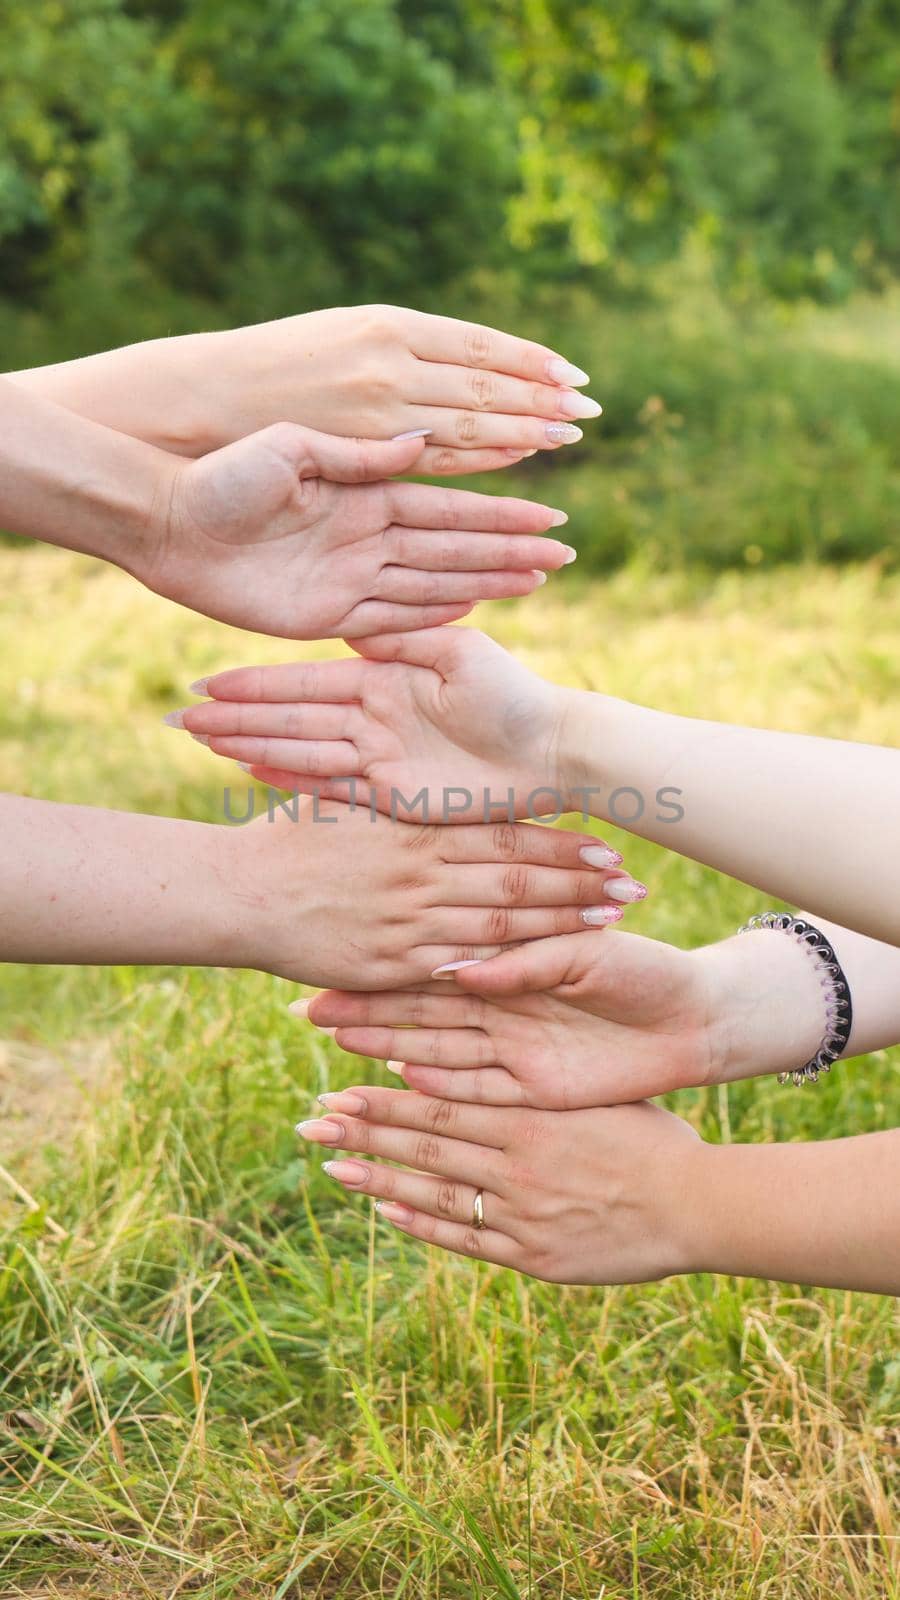 Girlfriends put their palms of their hands on top of each other